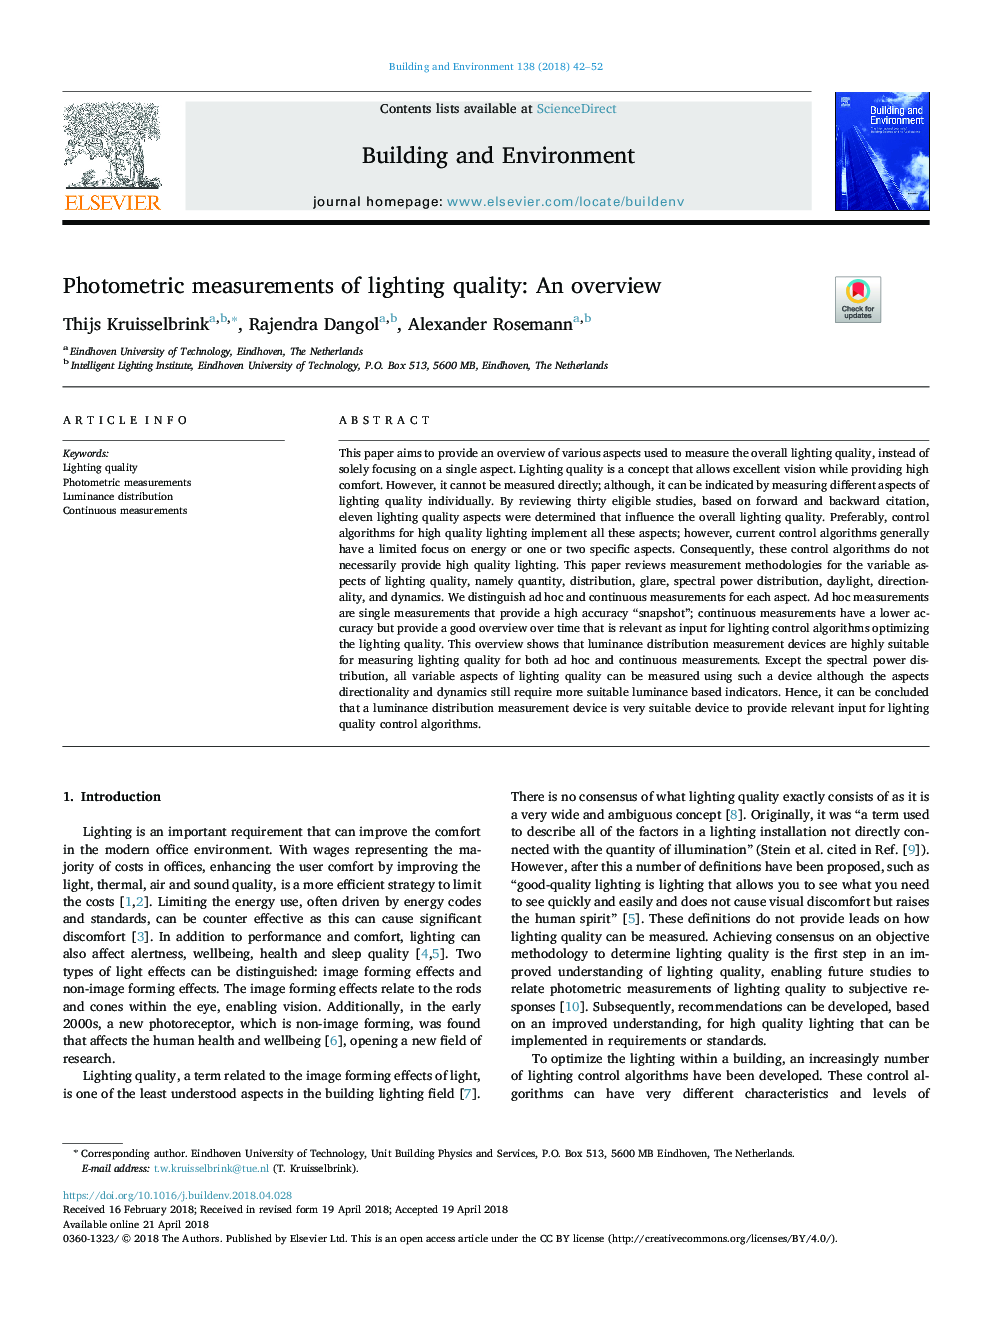 Photometric measurements of lighting quality: An overview